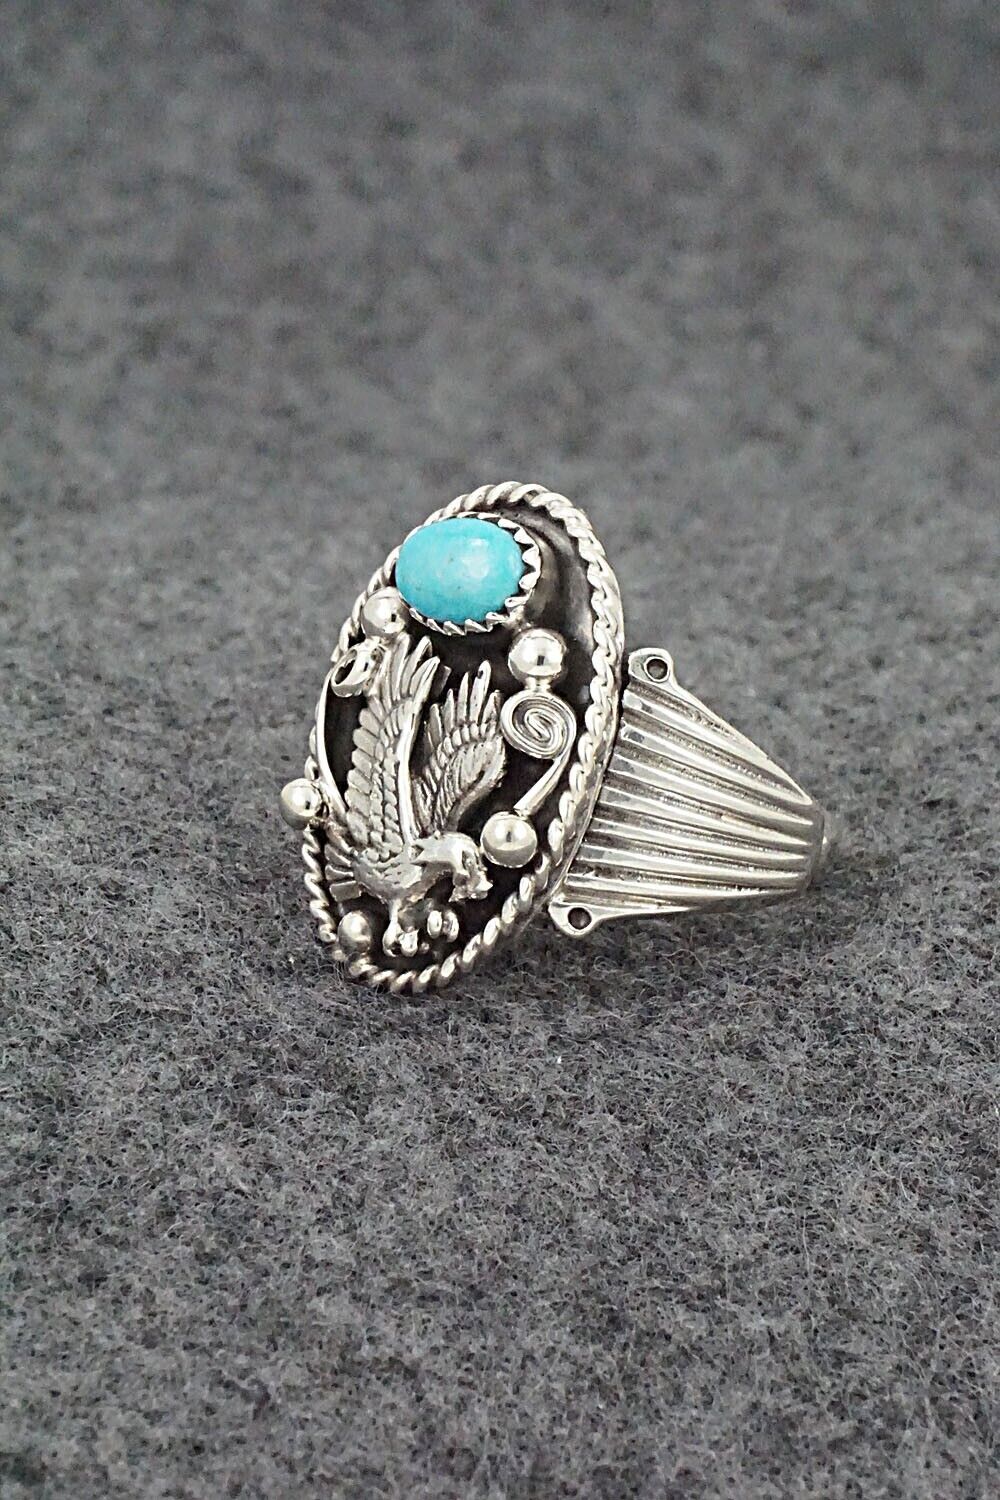 Turquoise & Sterling Silver Ring - Jeannette Saunders - Size 10.5